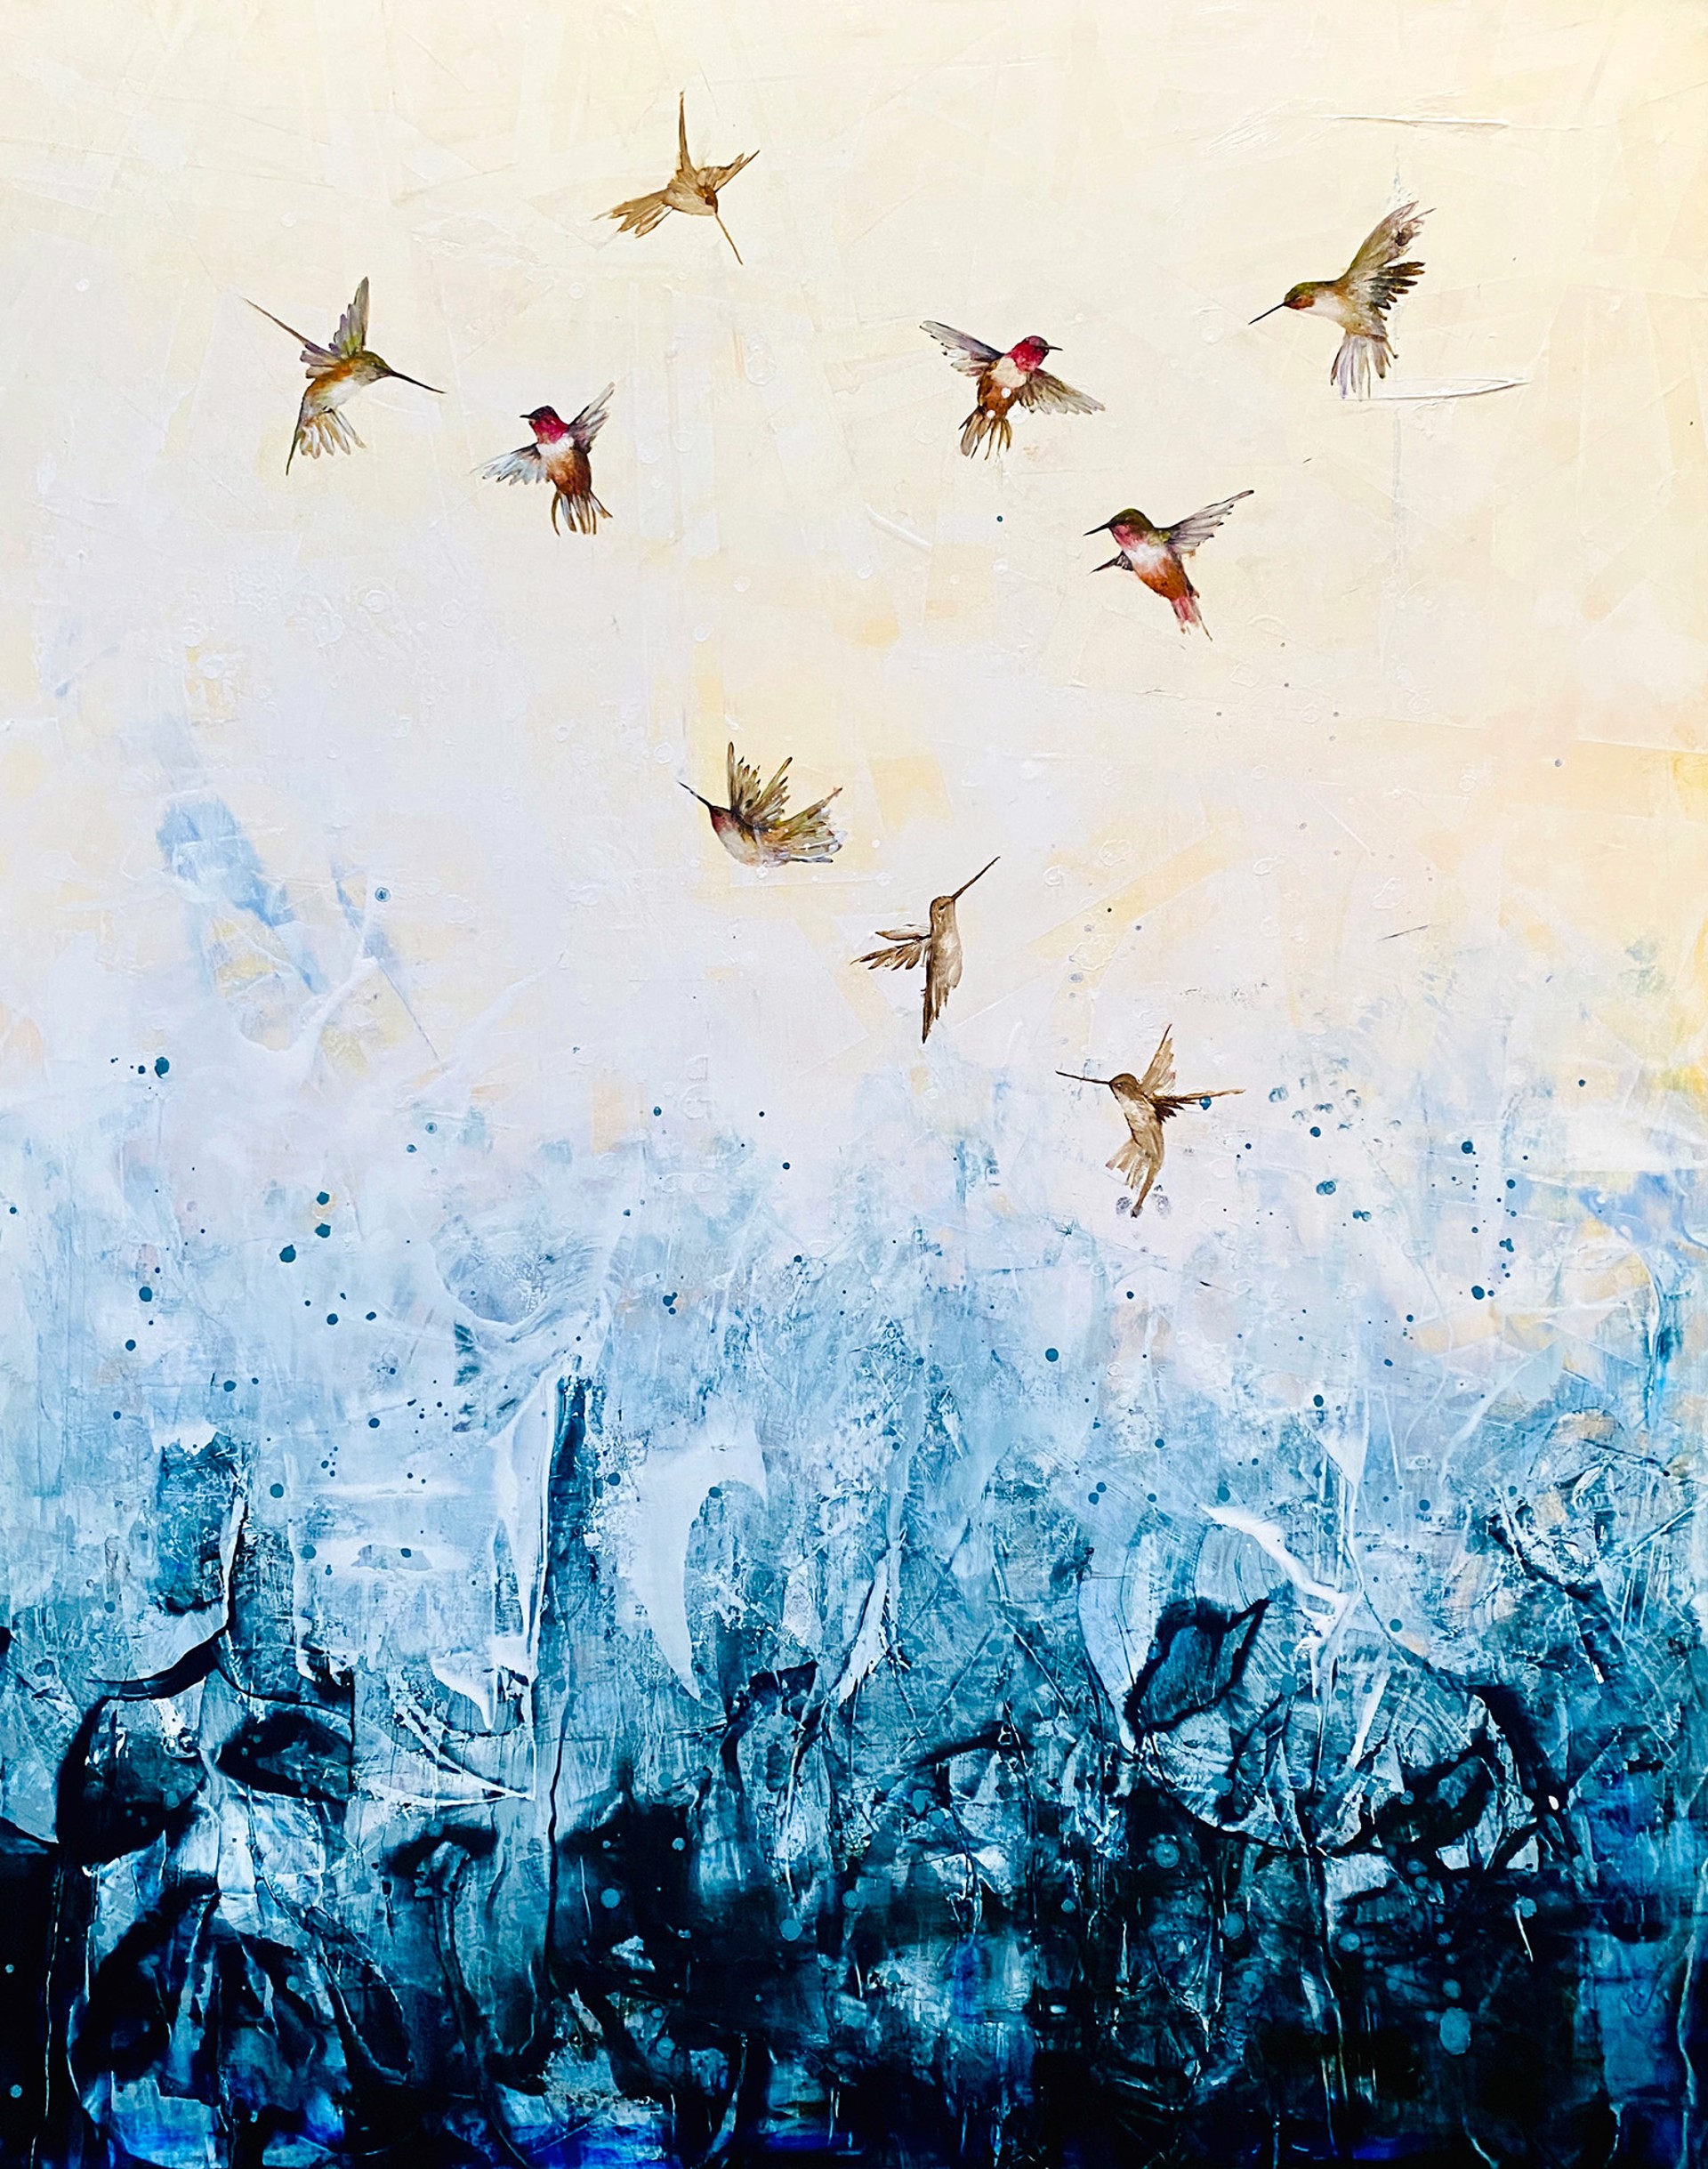 Original Oil Painting By Jenna Von Benedikt With Hummingbirds On An Abstract Background